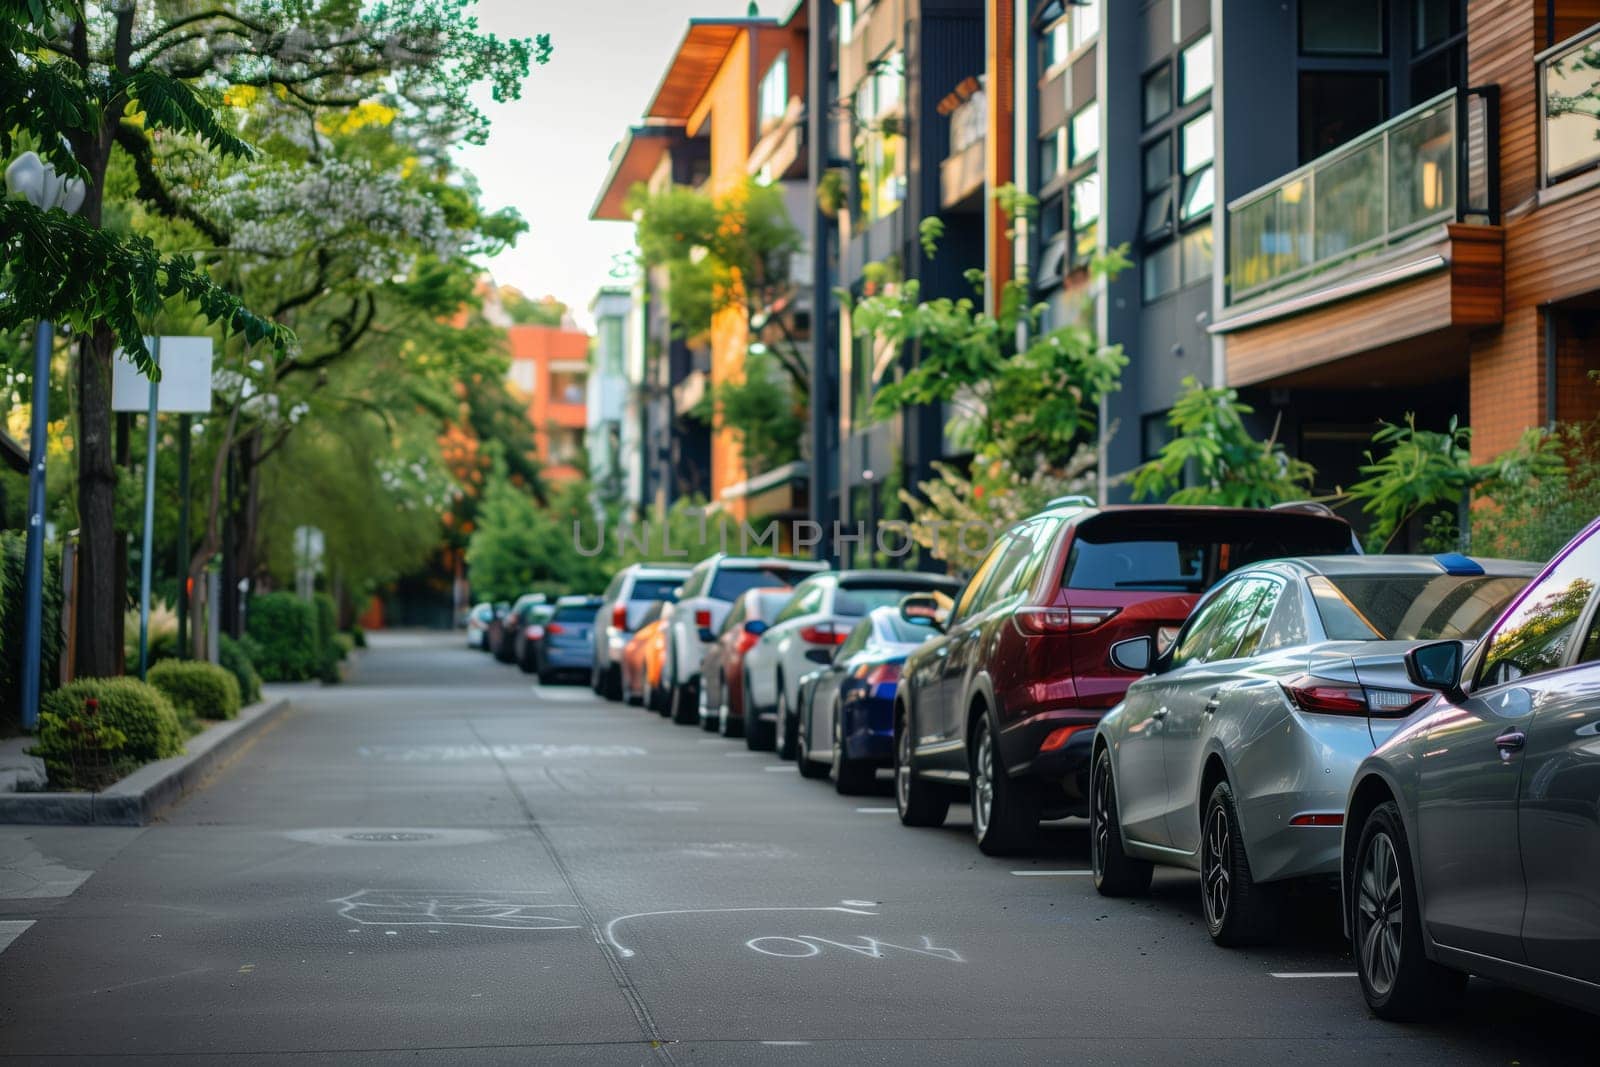 A row of vehicles is parked along the city street, with cars lined up next to the sidewalk. Buildings, plants, and trees line the other side of the road